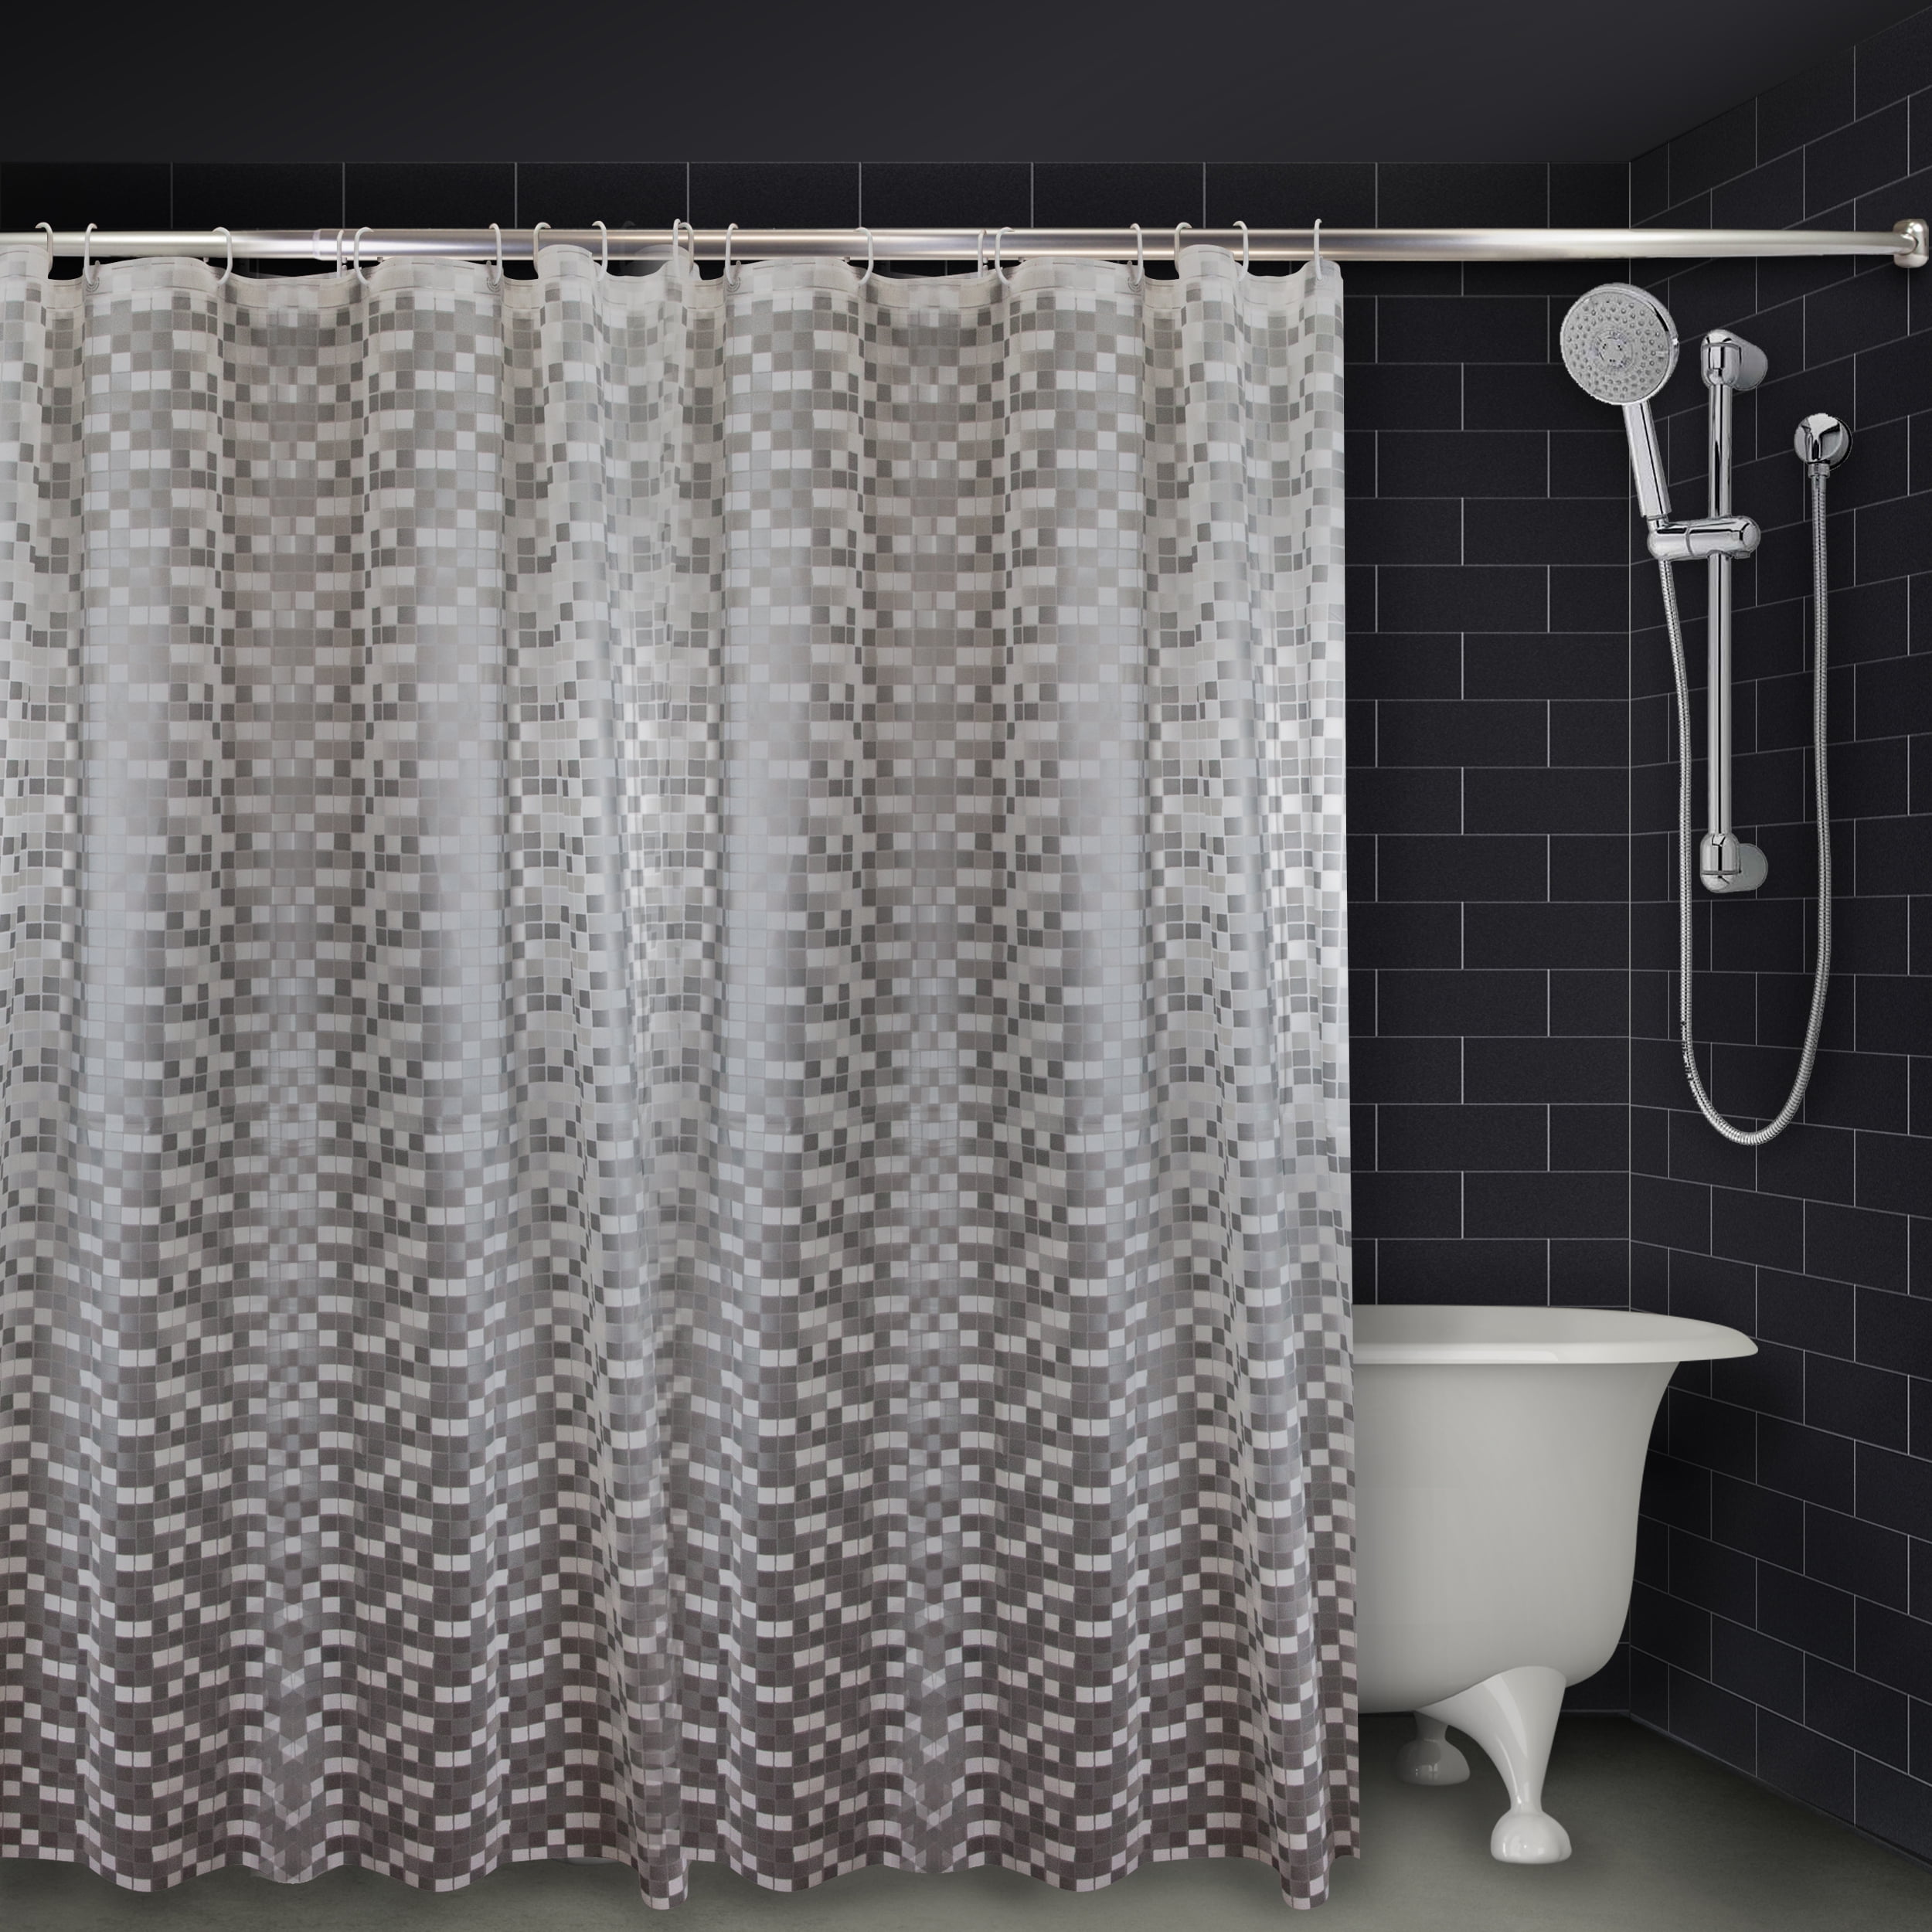 180*180cm Large 3D Shower Curtain Clear Plastic EVA Diamond Water Cube Thicker 